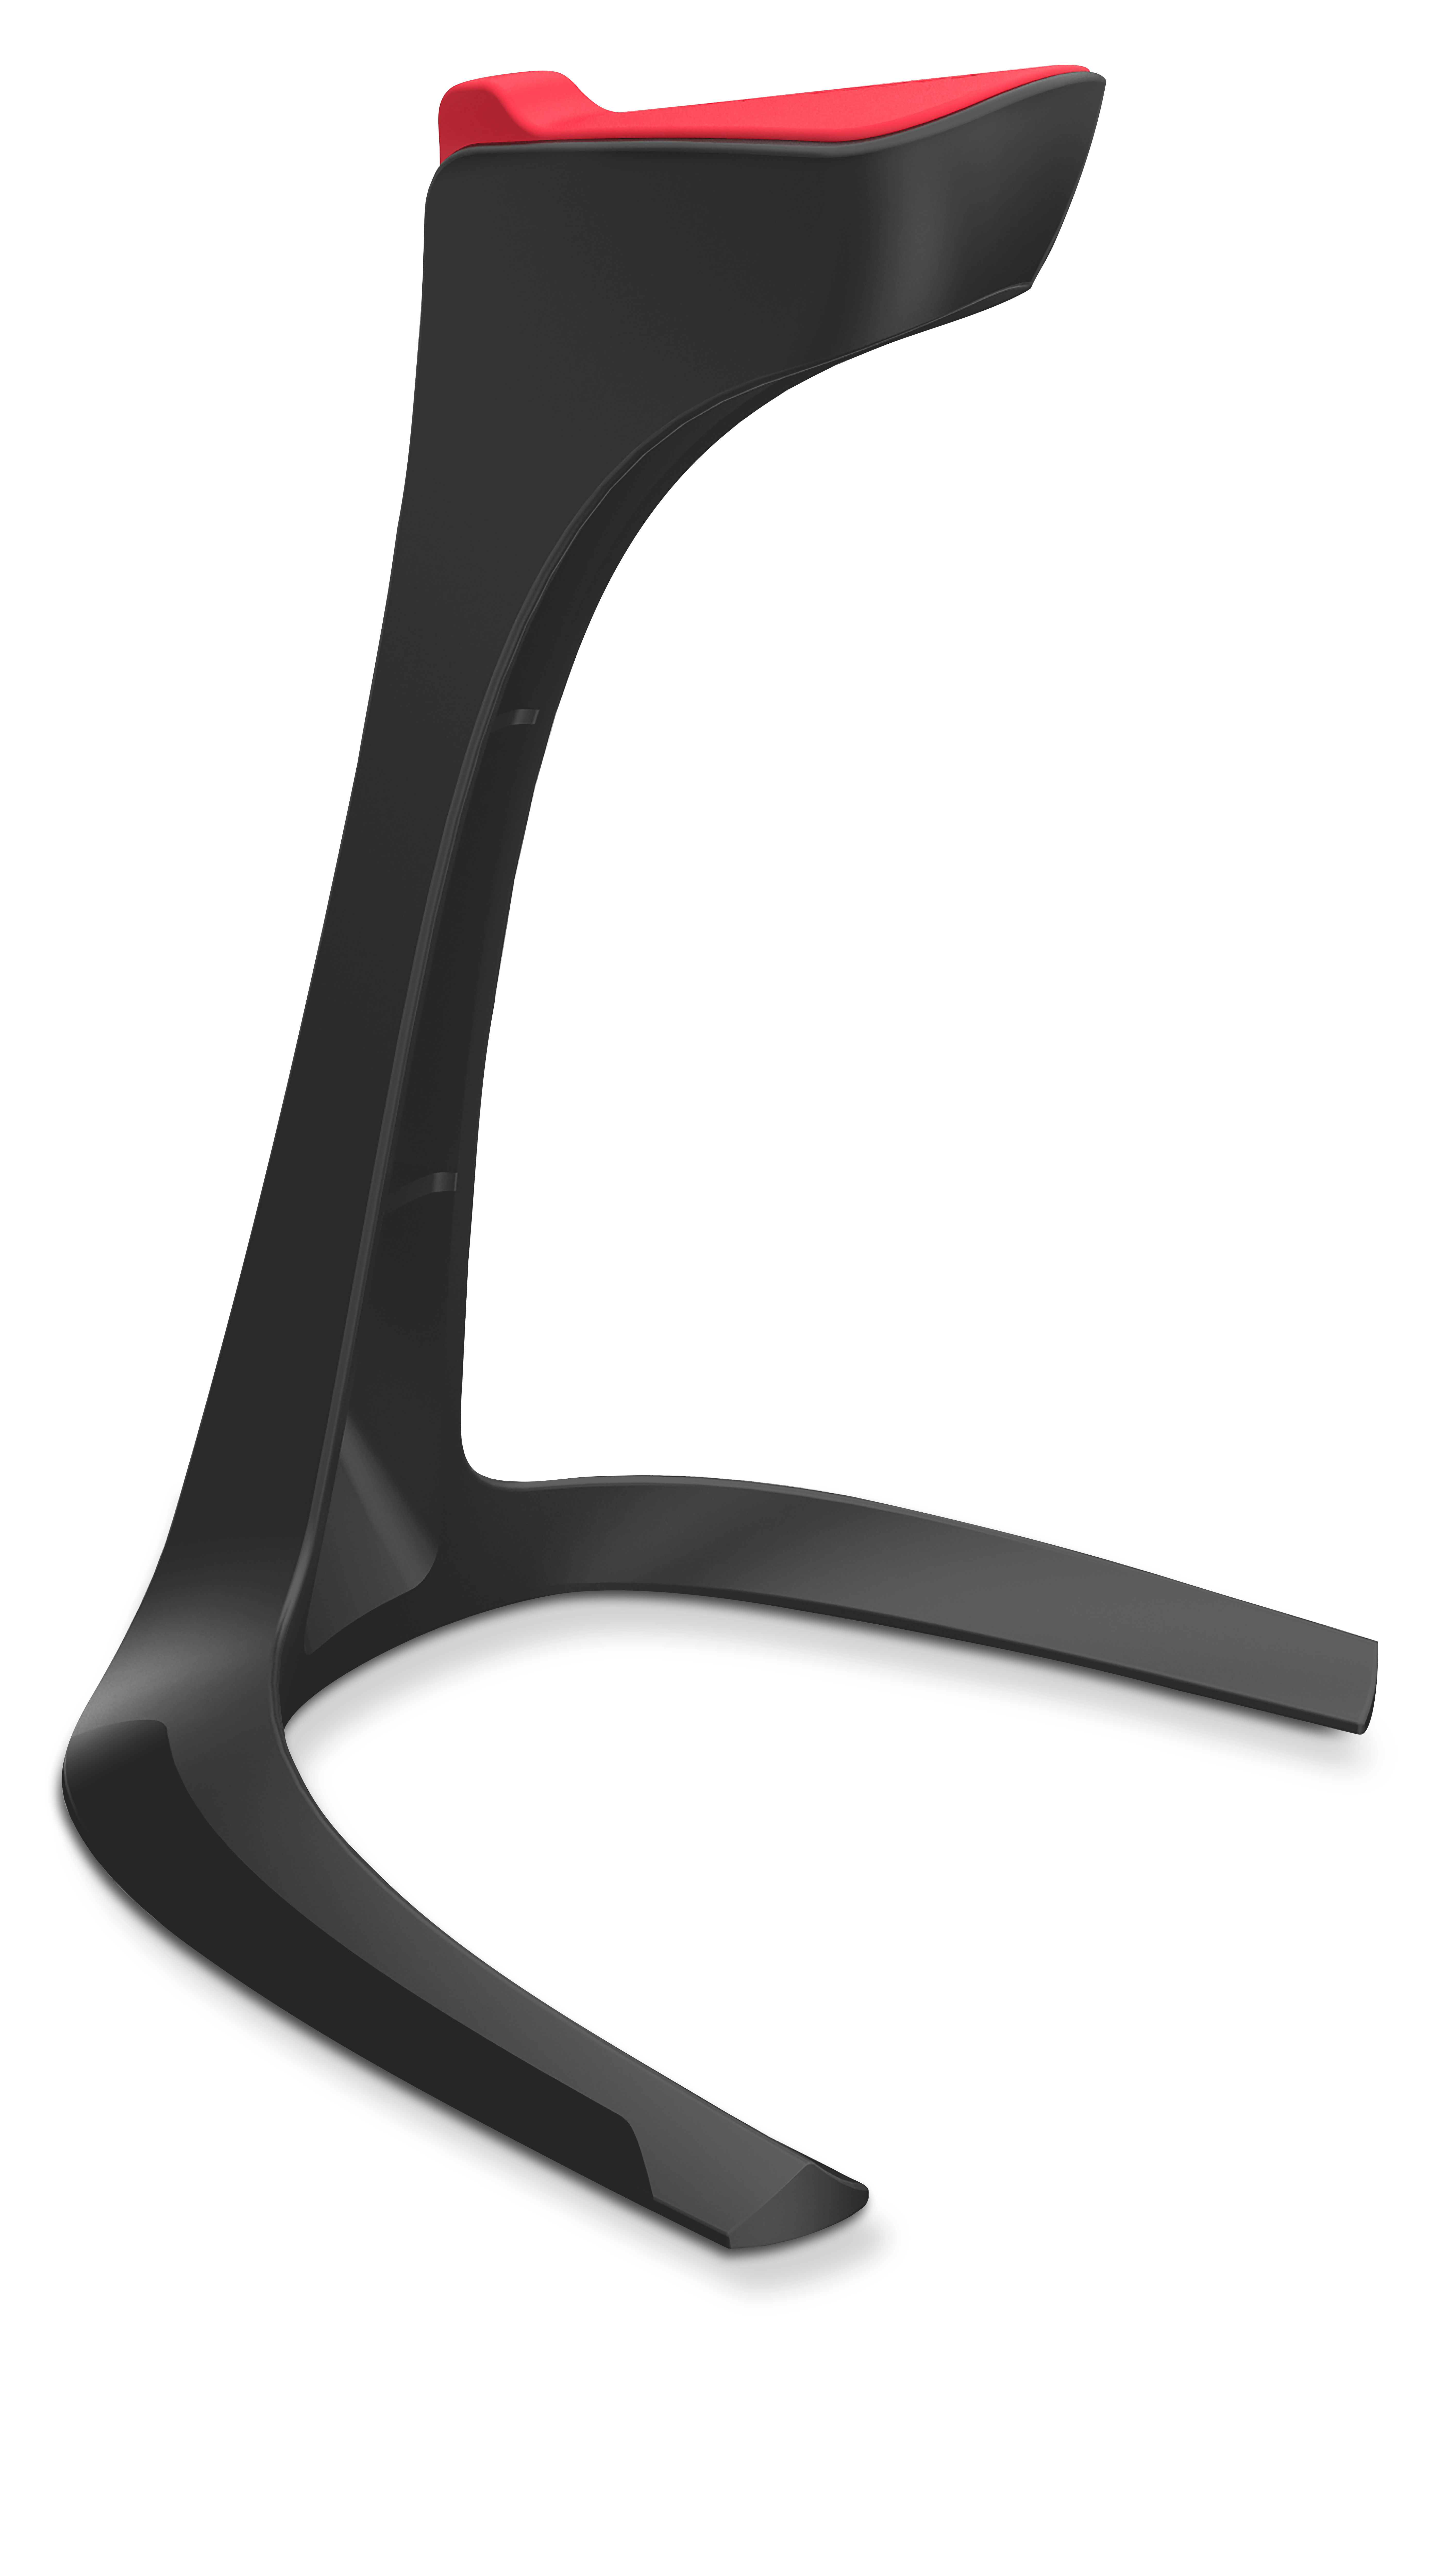 EXCEDO Gaming Headset Stand, black